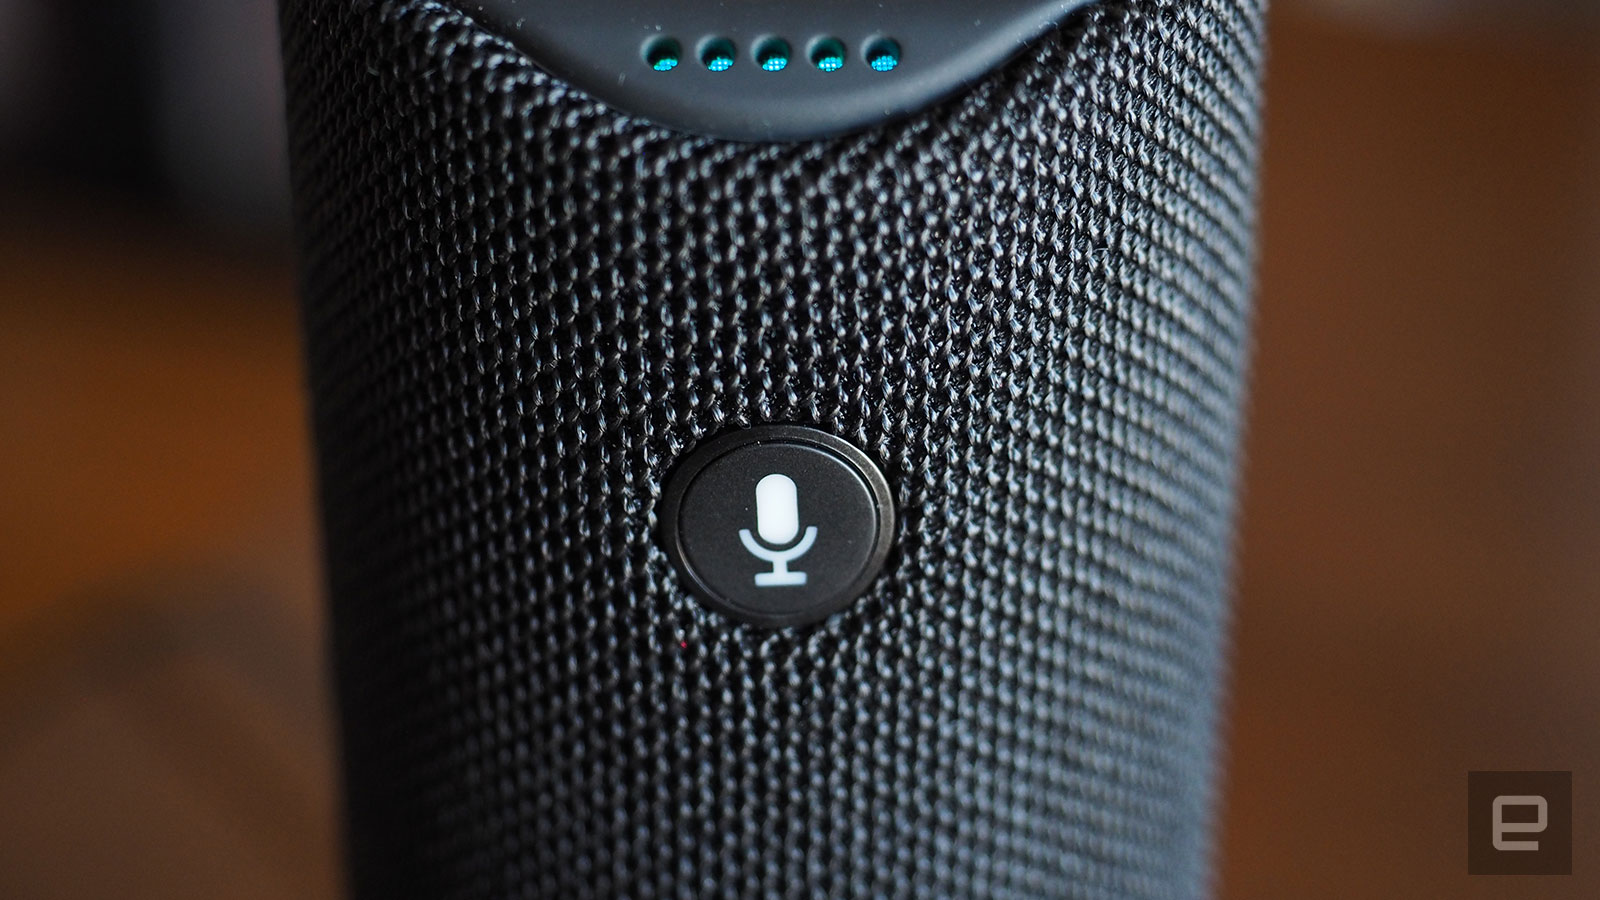 The Amazon Tap is a so-so speaker with a so-so voice assistant